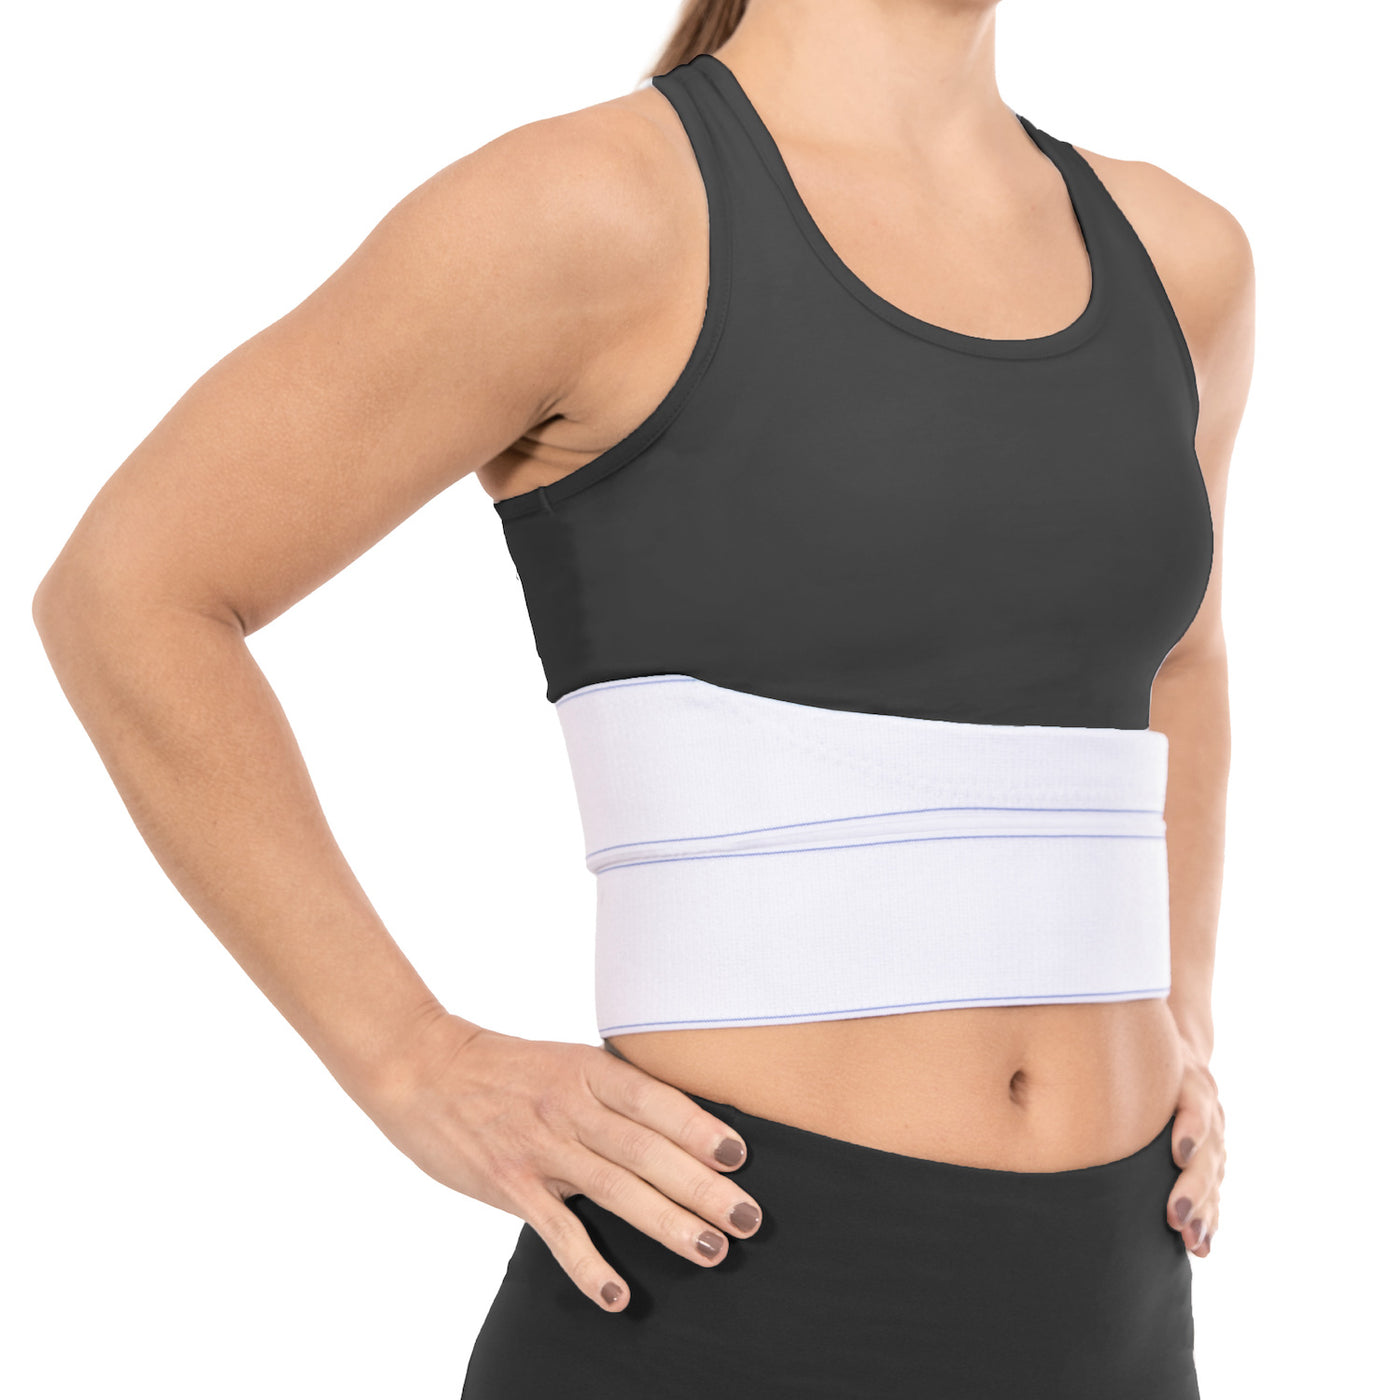 Broken Rib Belt: Wrap Brace for Fractured and Dislocated Ribs